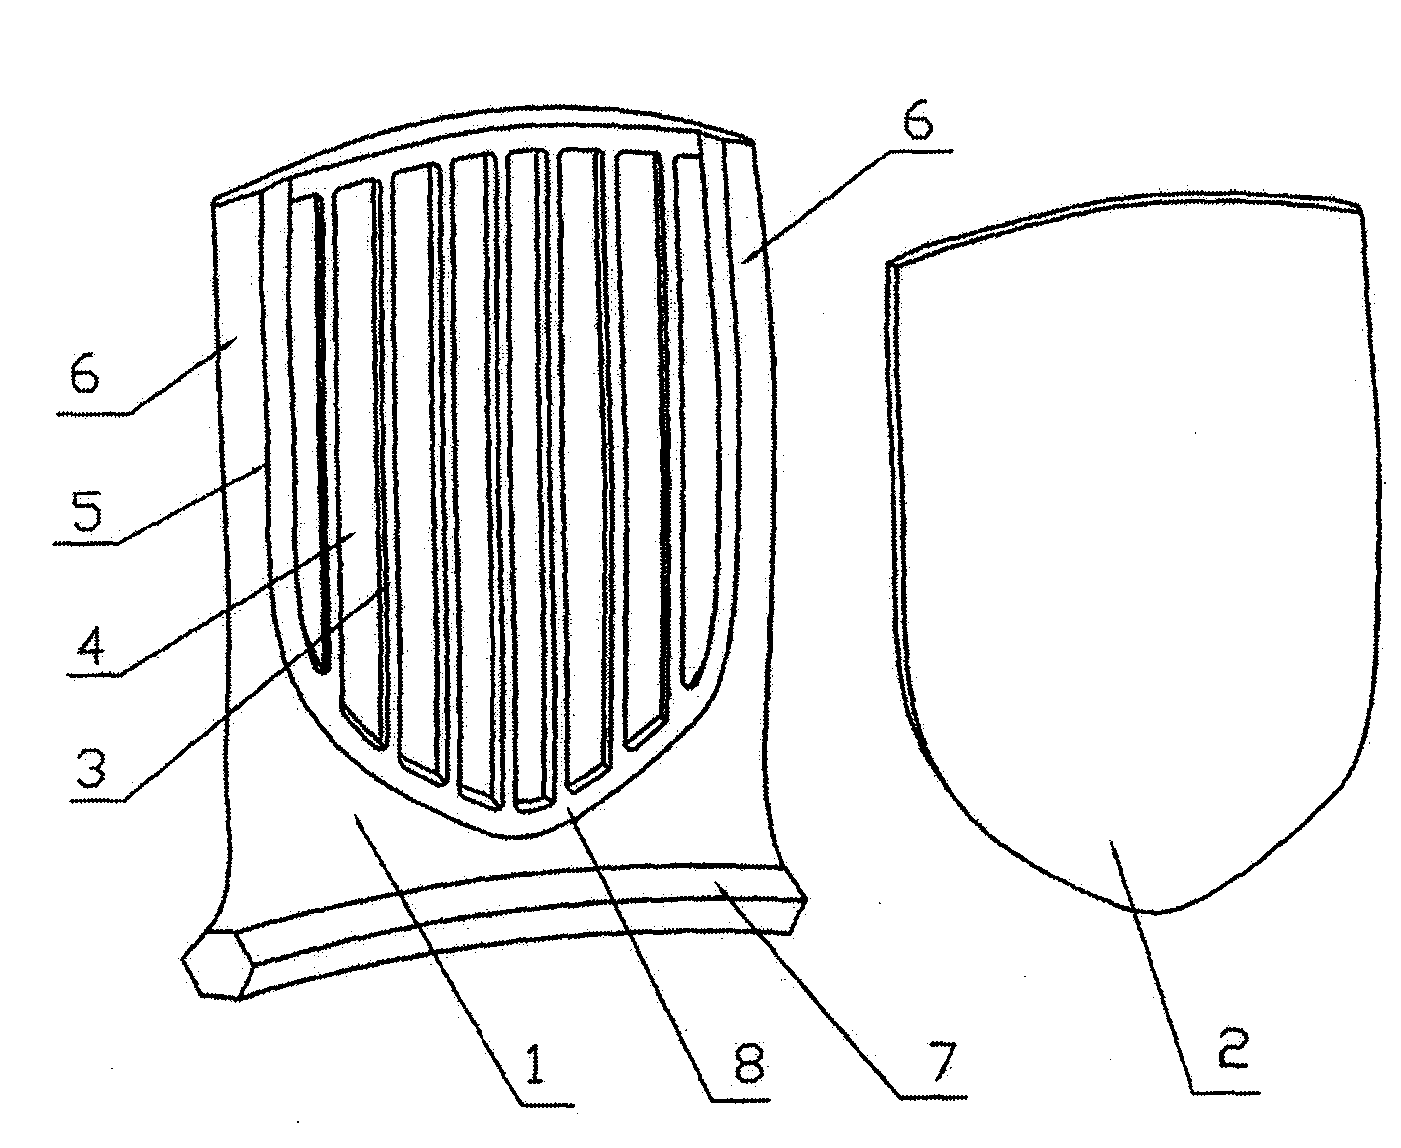 Hollow fan blade for aircraft engine